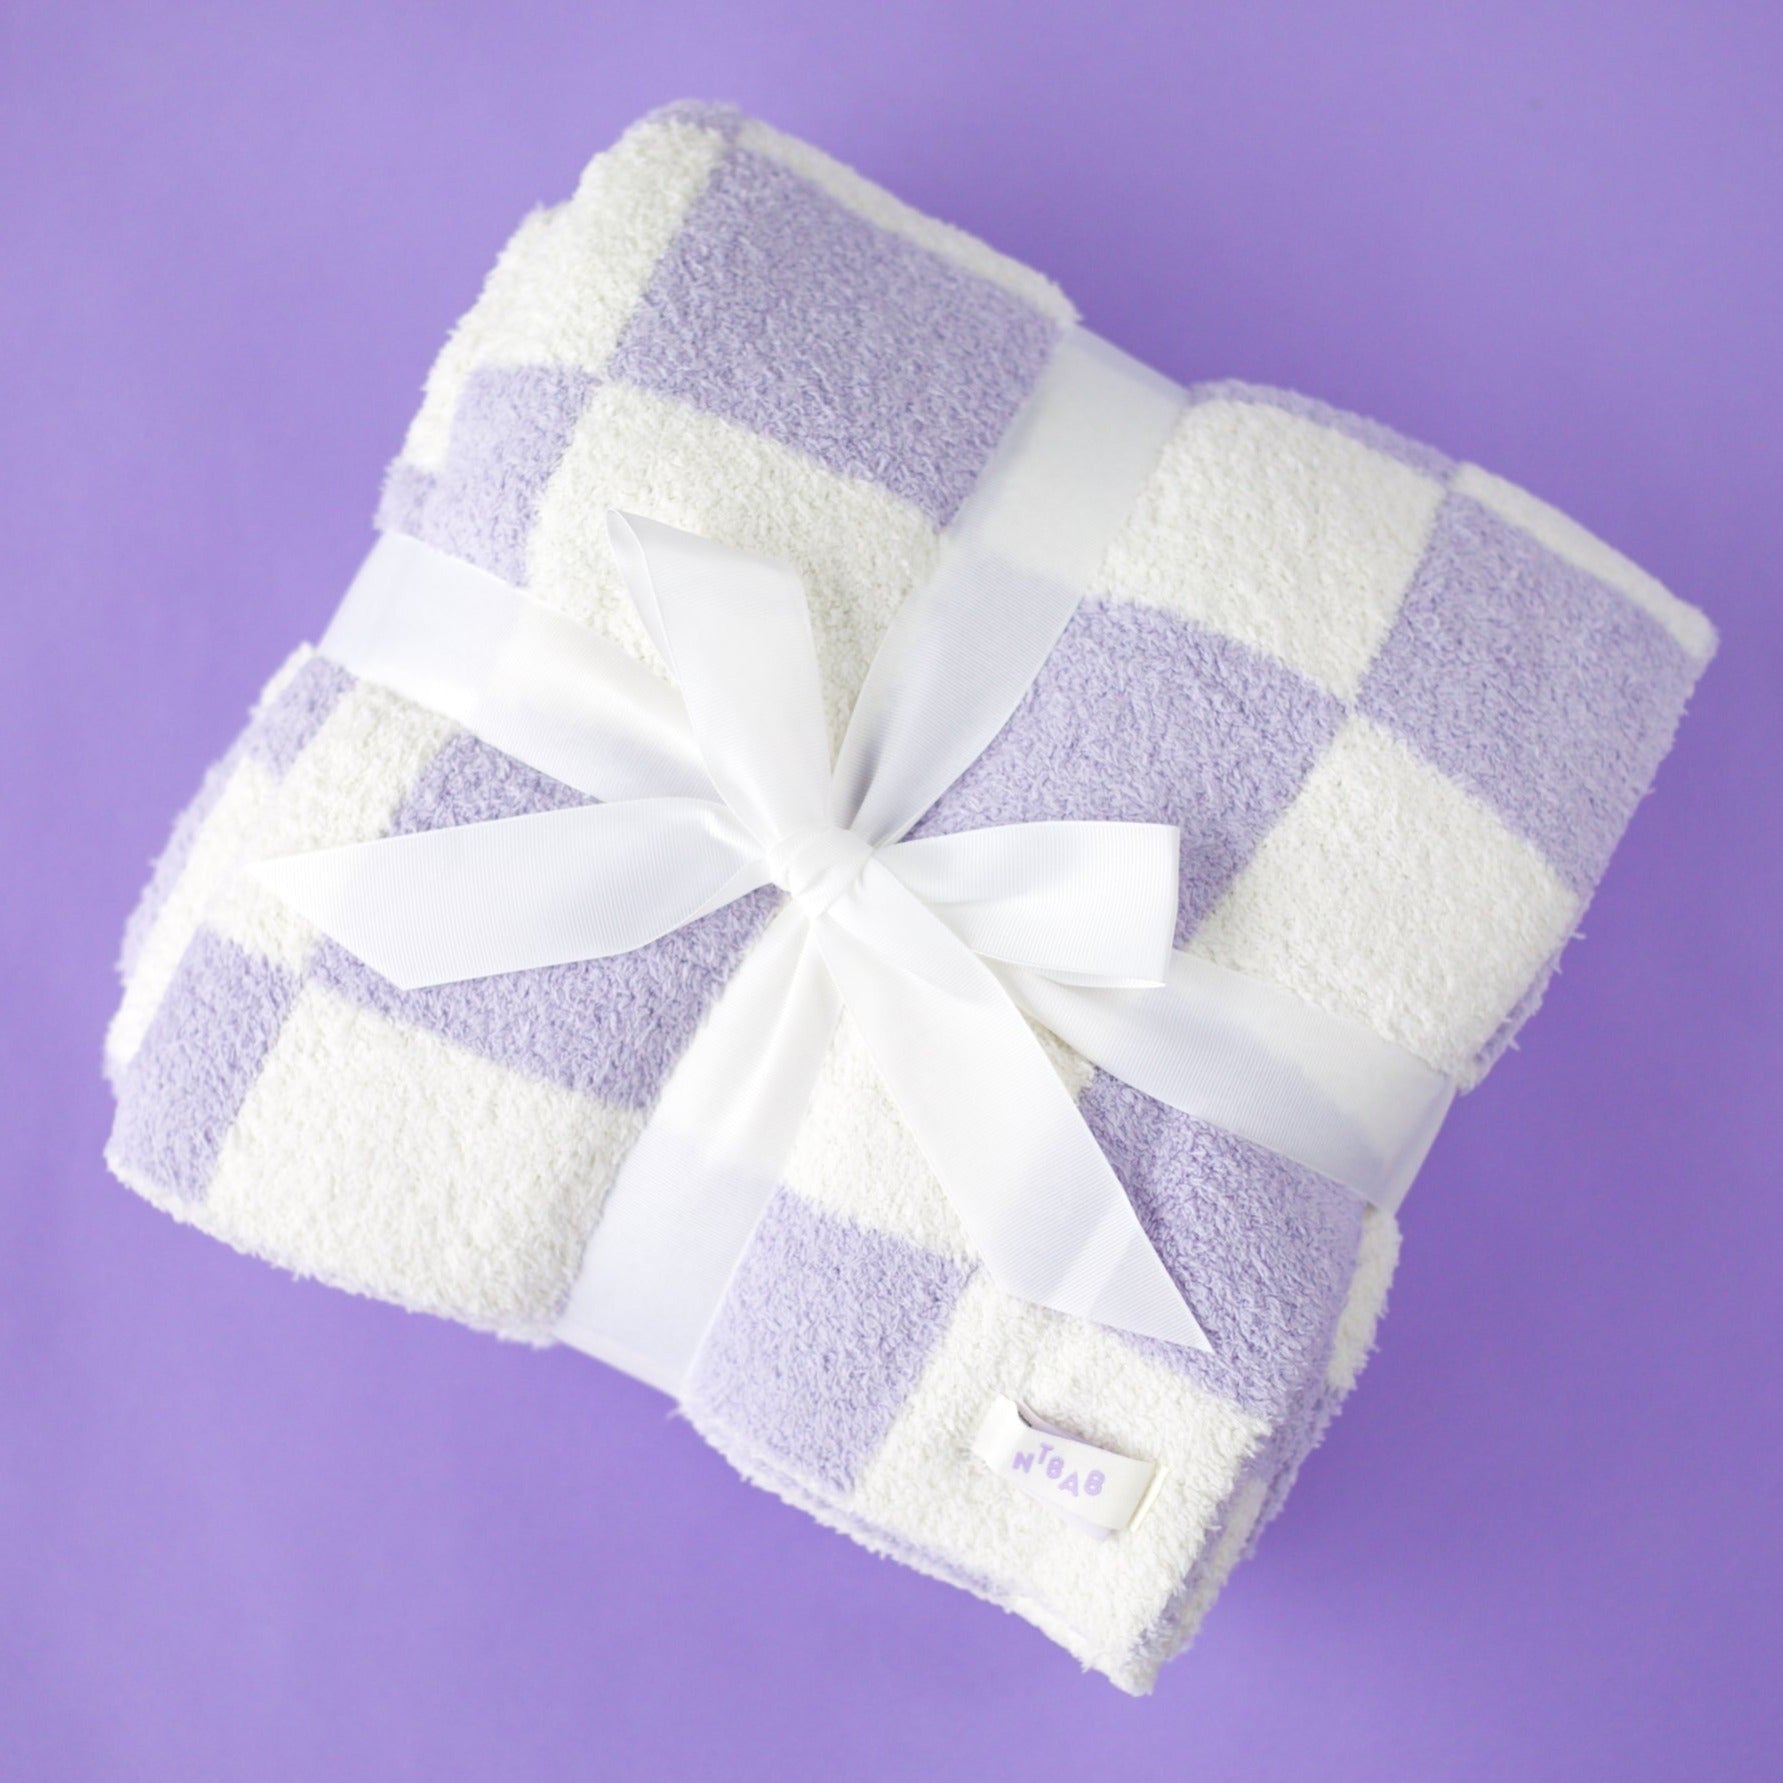 A lavender and white checkered blanket against a purple background